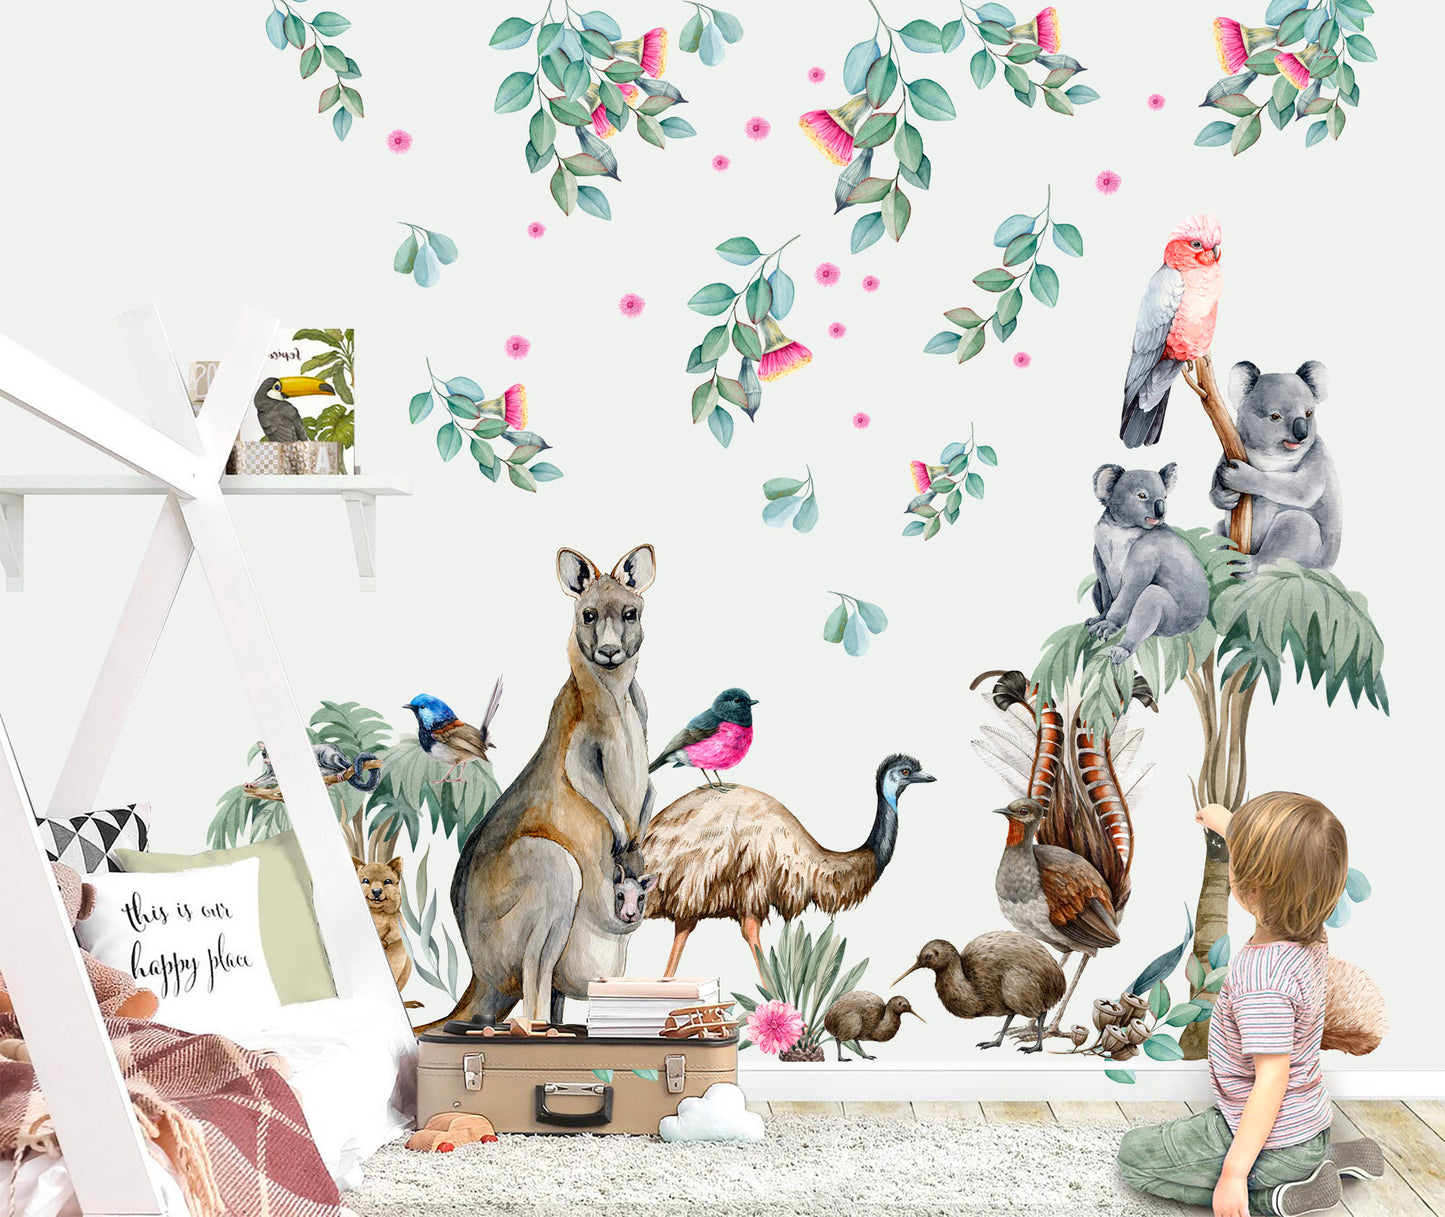 Aussie Animals and Flowers Kangaroo Koala Leaves Removable Wall Decal Peel and Stick - BR254